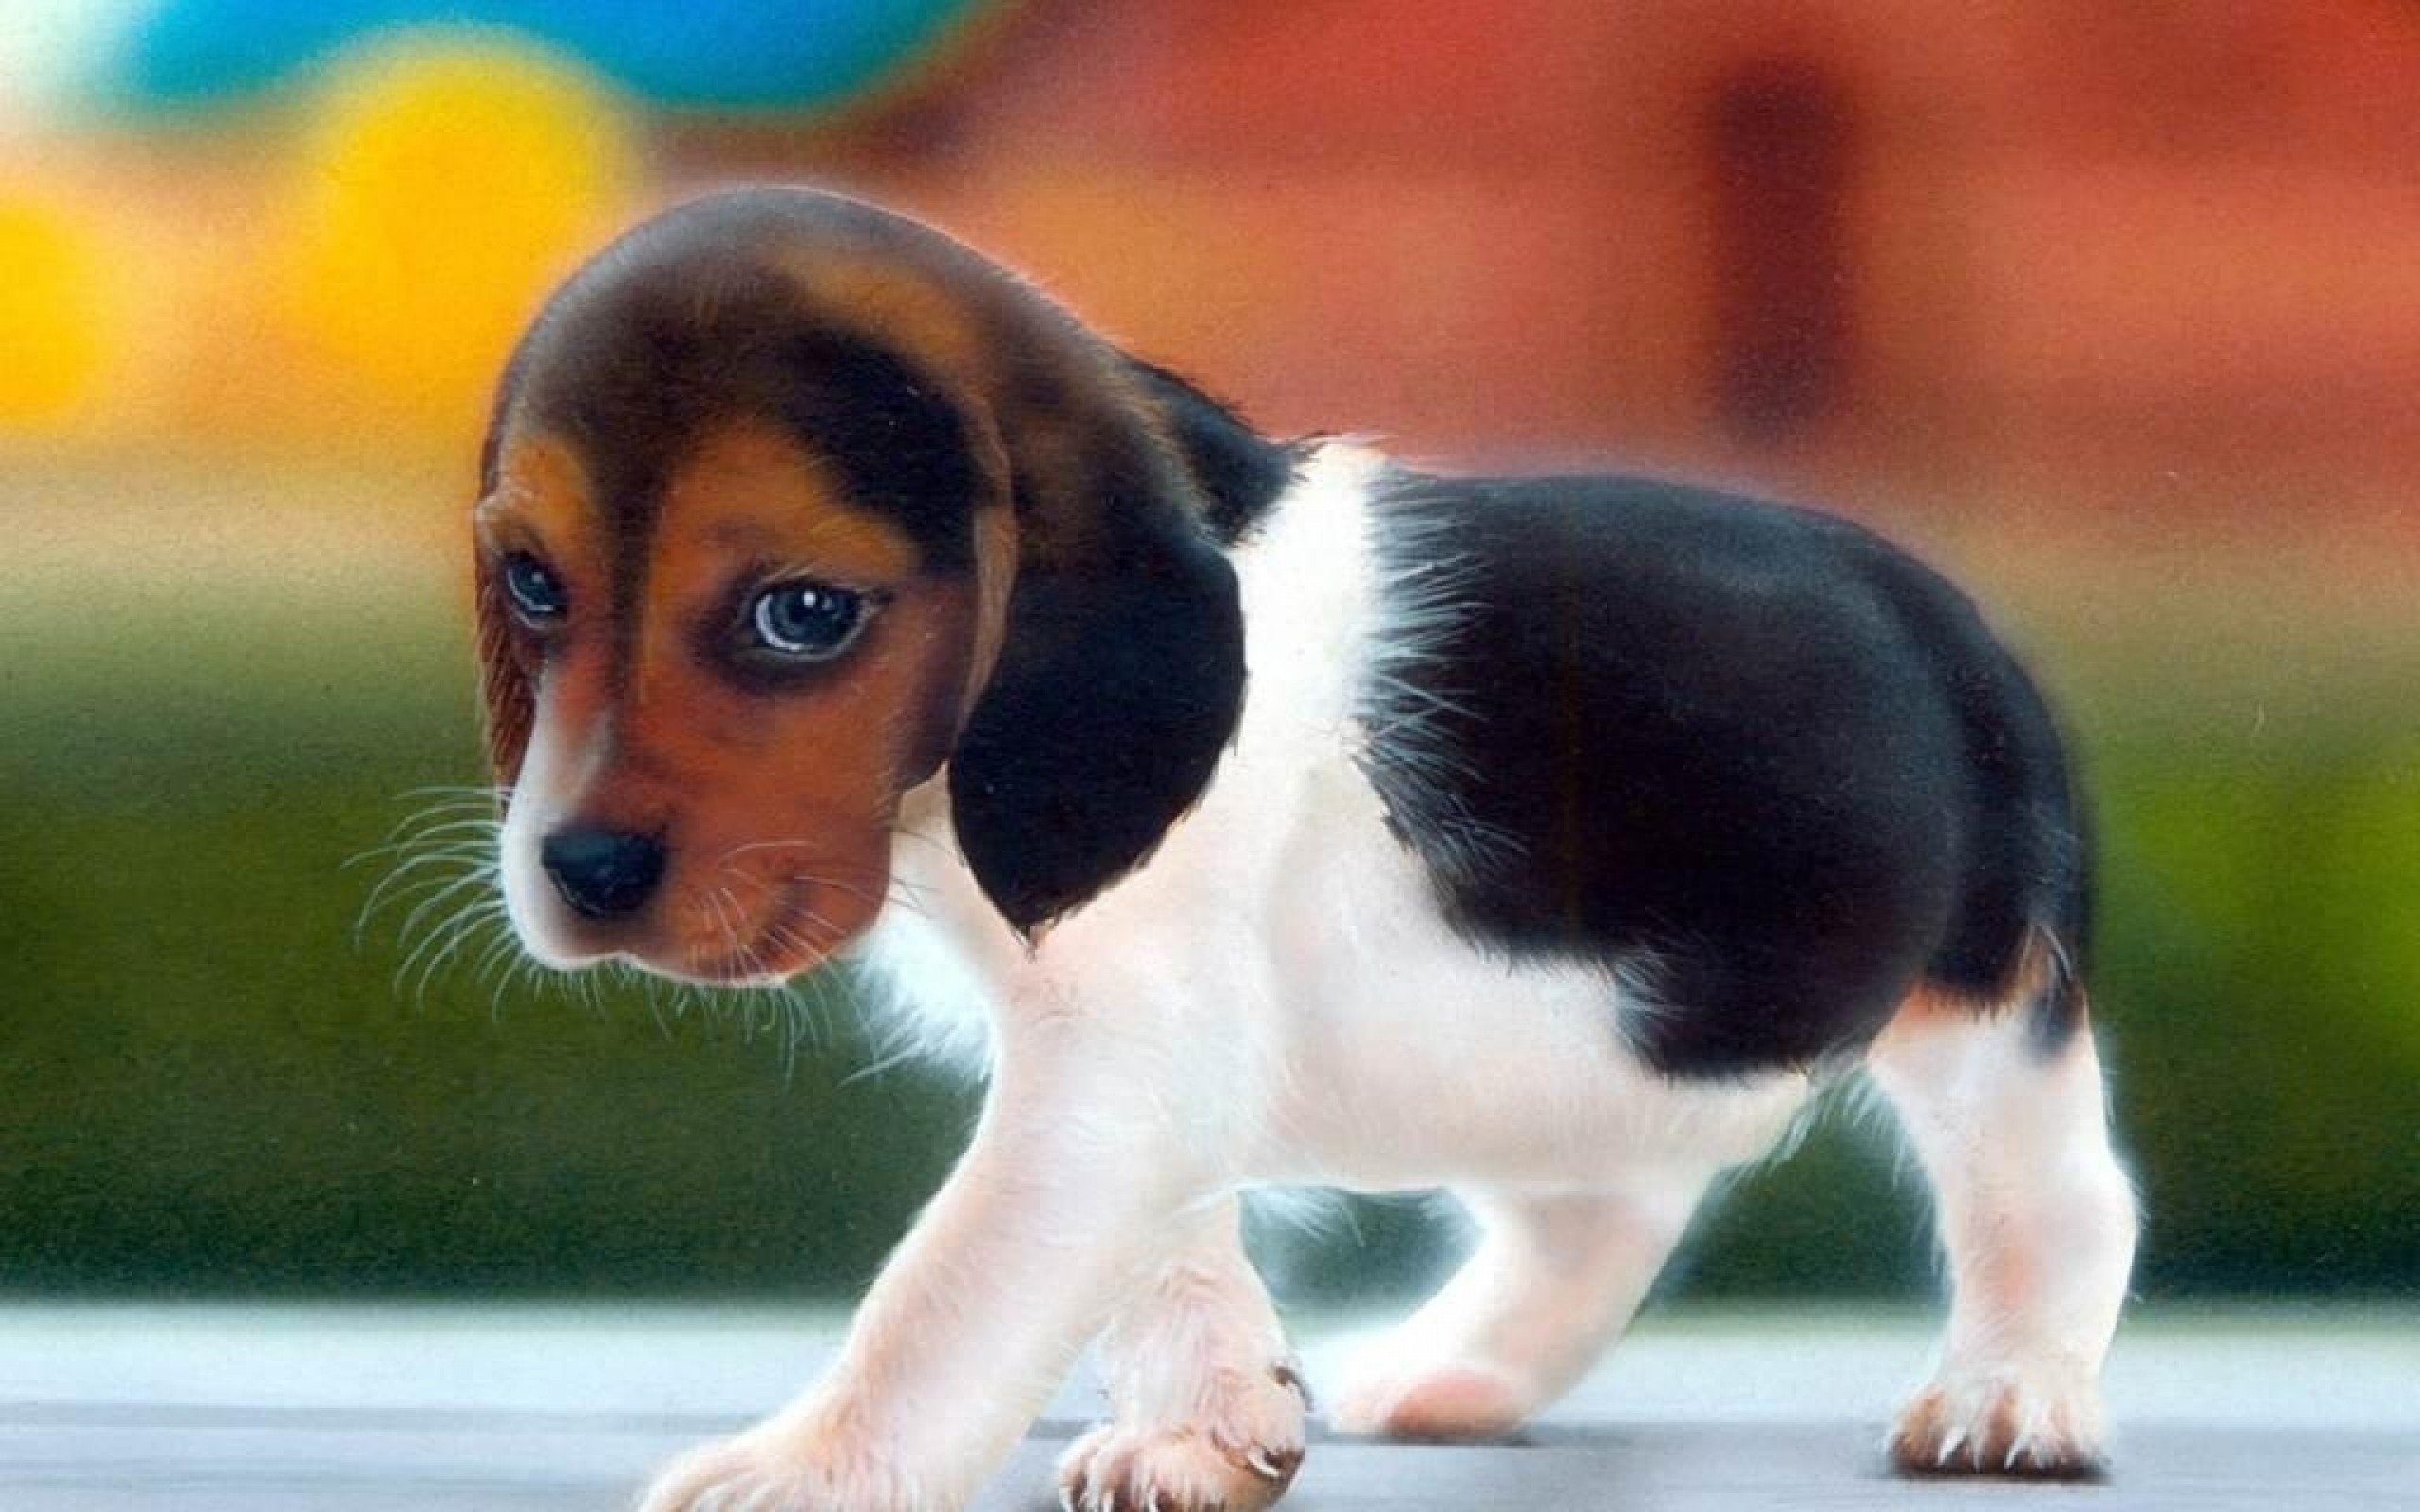 Cute Dog Wallpaper Gallery - Hd Dog Images Download , HD Wallpaper & Backgrounds